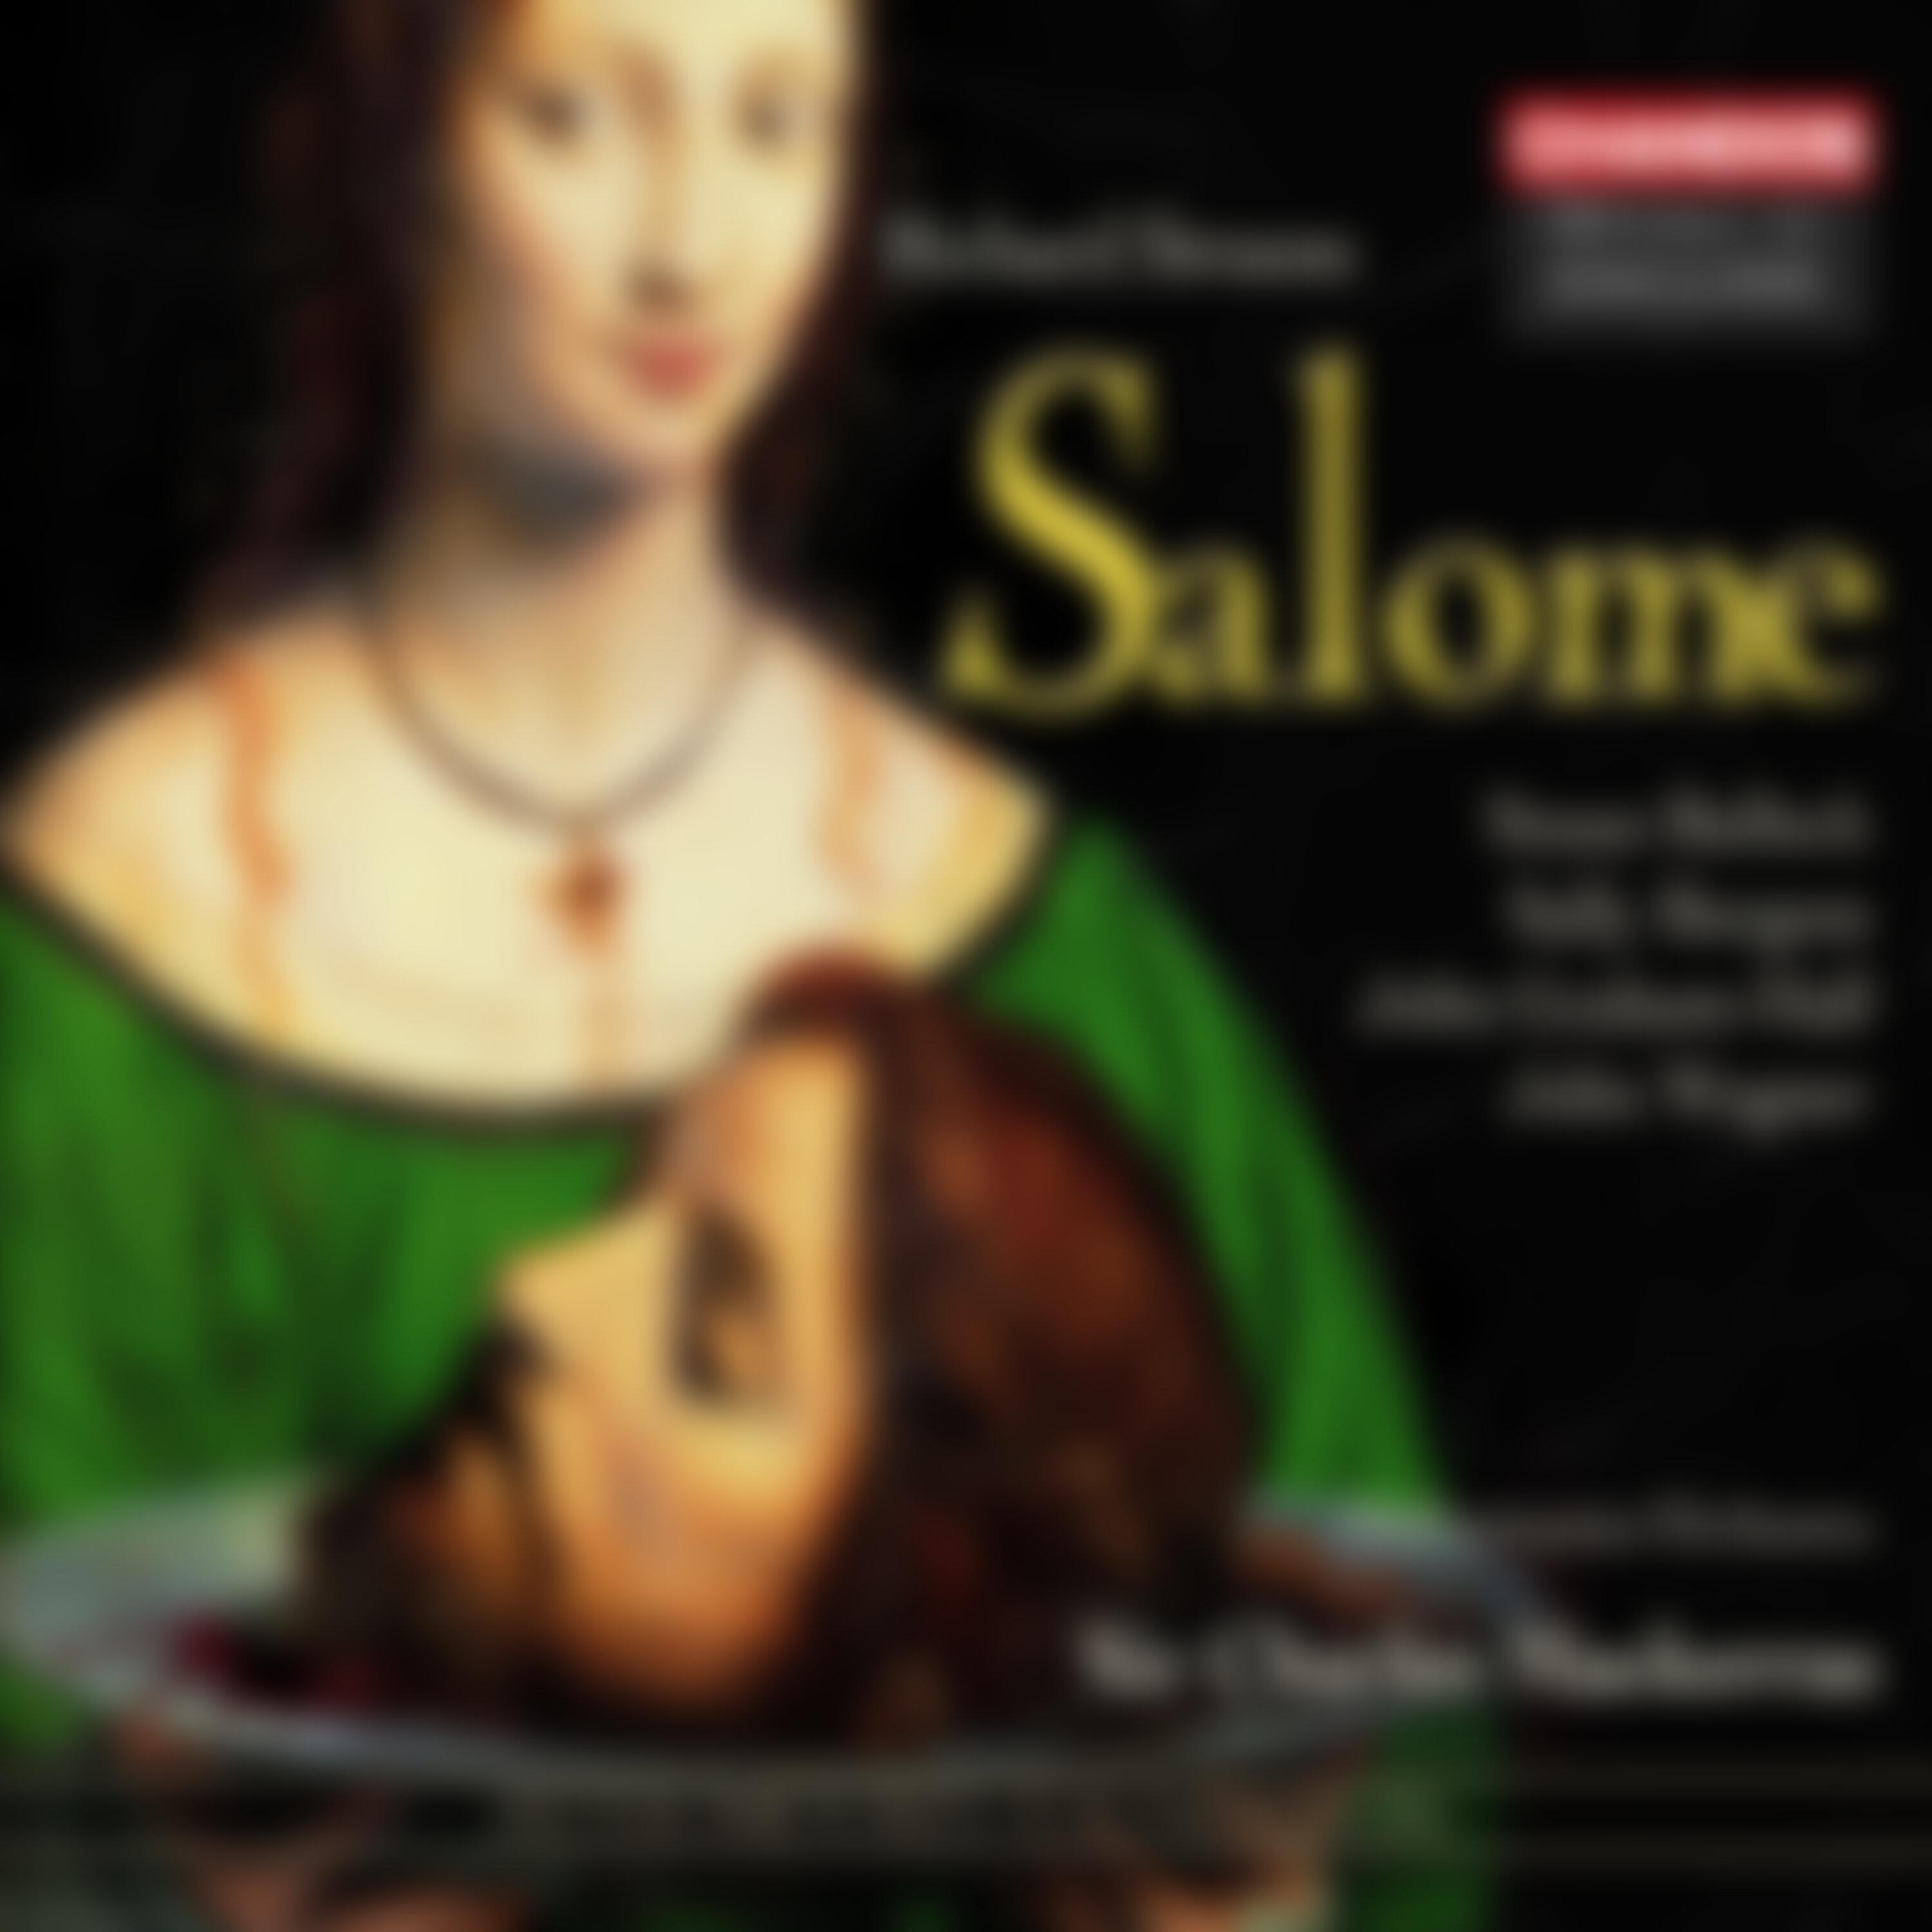 Salome, Op. 54, TrV 215, Scene 4: Salome, just think what you're